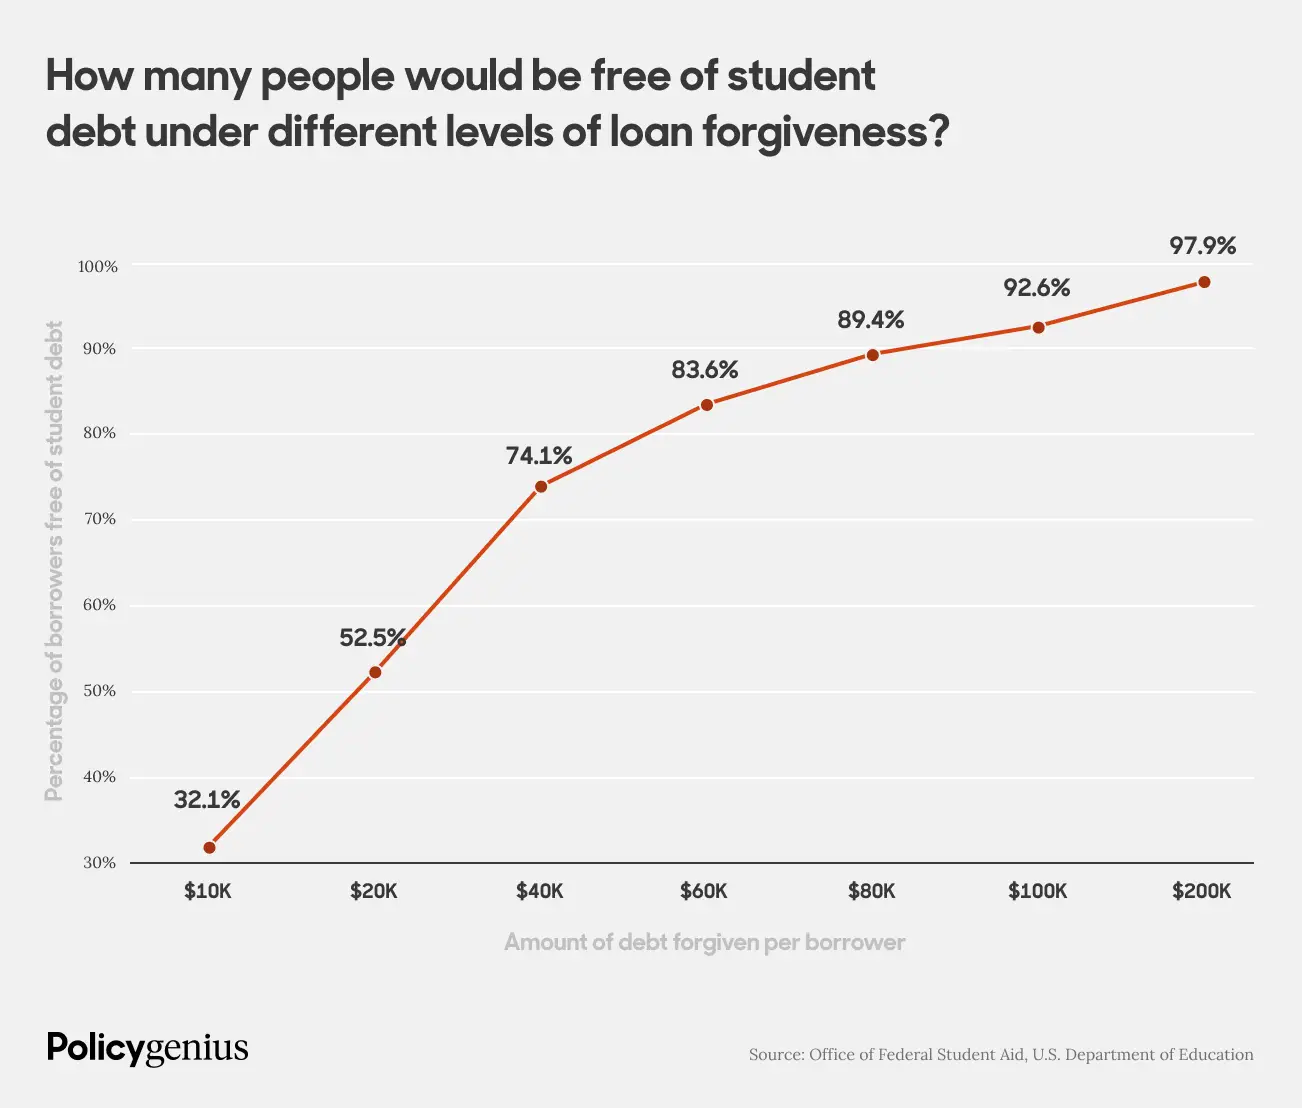 How many people would be free of student debt under different levels of loan forgiveness